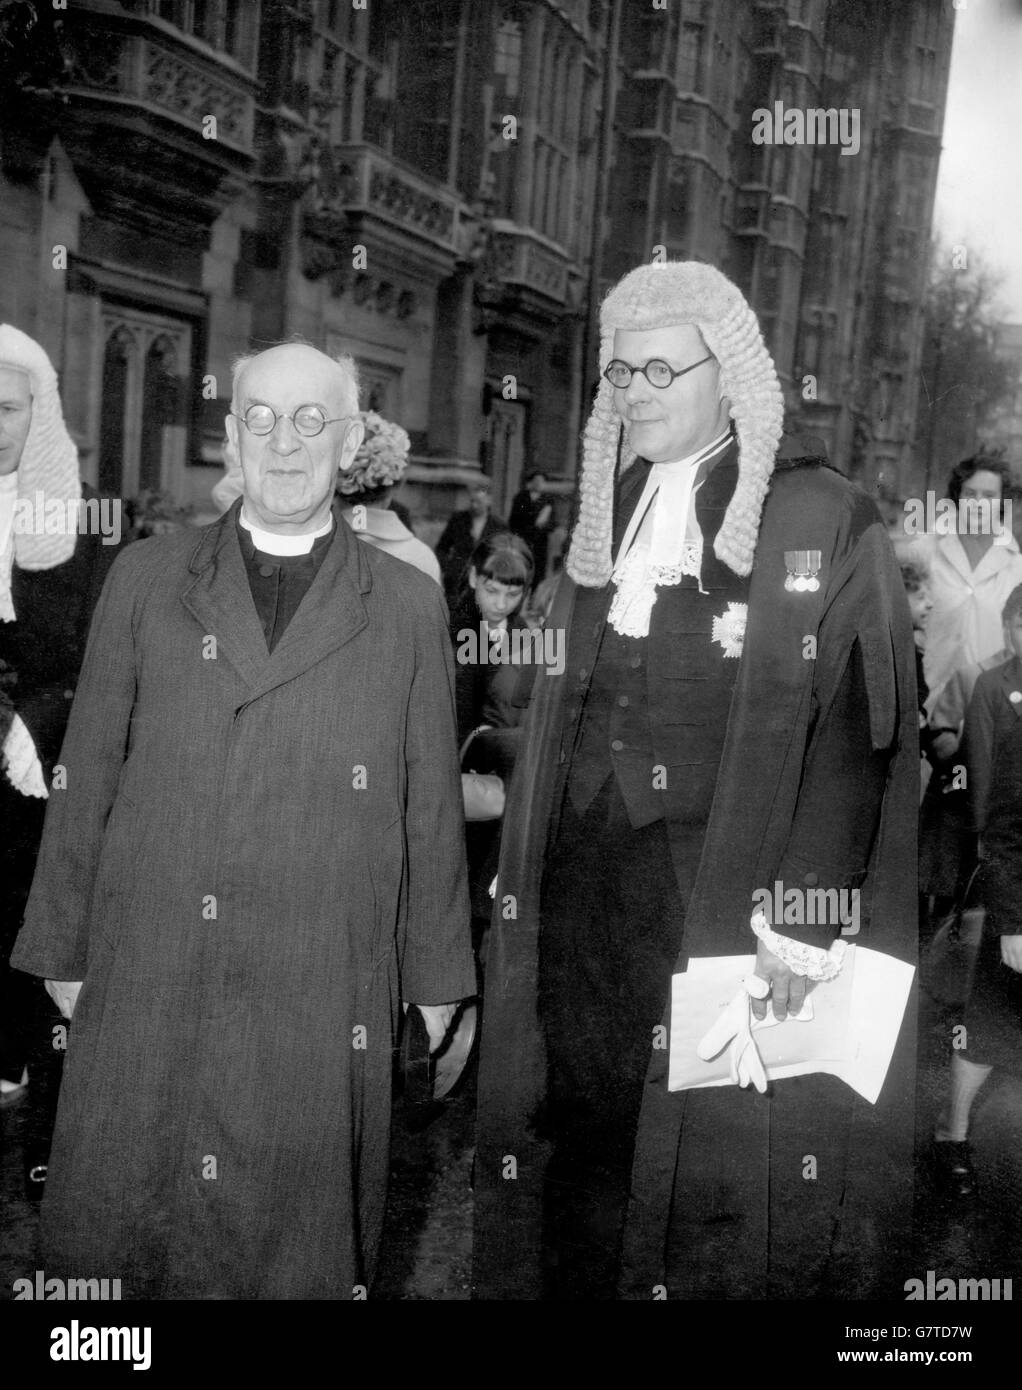 Dr, Geoffrey Fisher, Archbishop of Canterbury, arrives at Westminster for the swearing in ceremony at the House of Lord's. Also pictured is Sir George Coldstream (r). Stock Photo